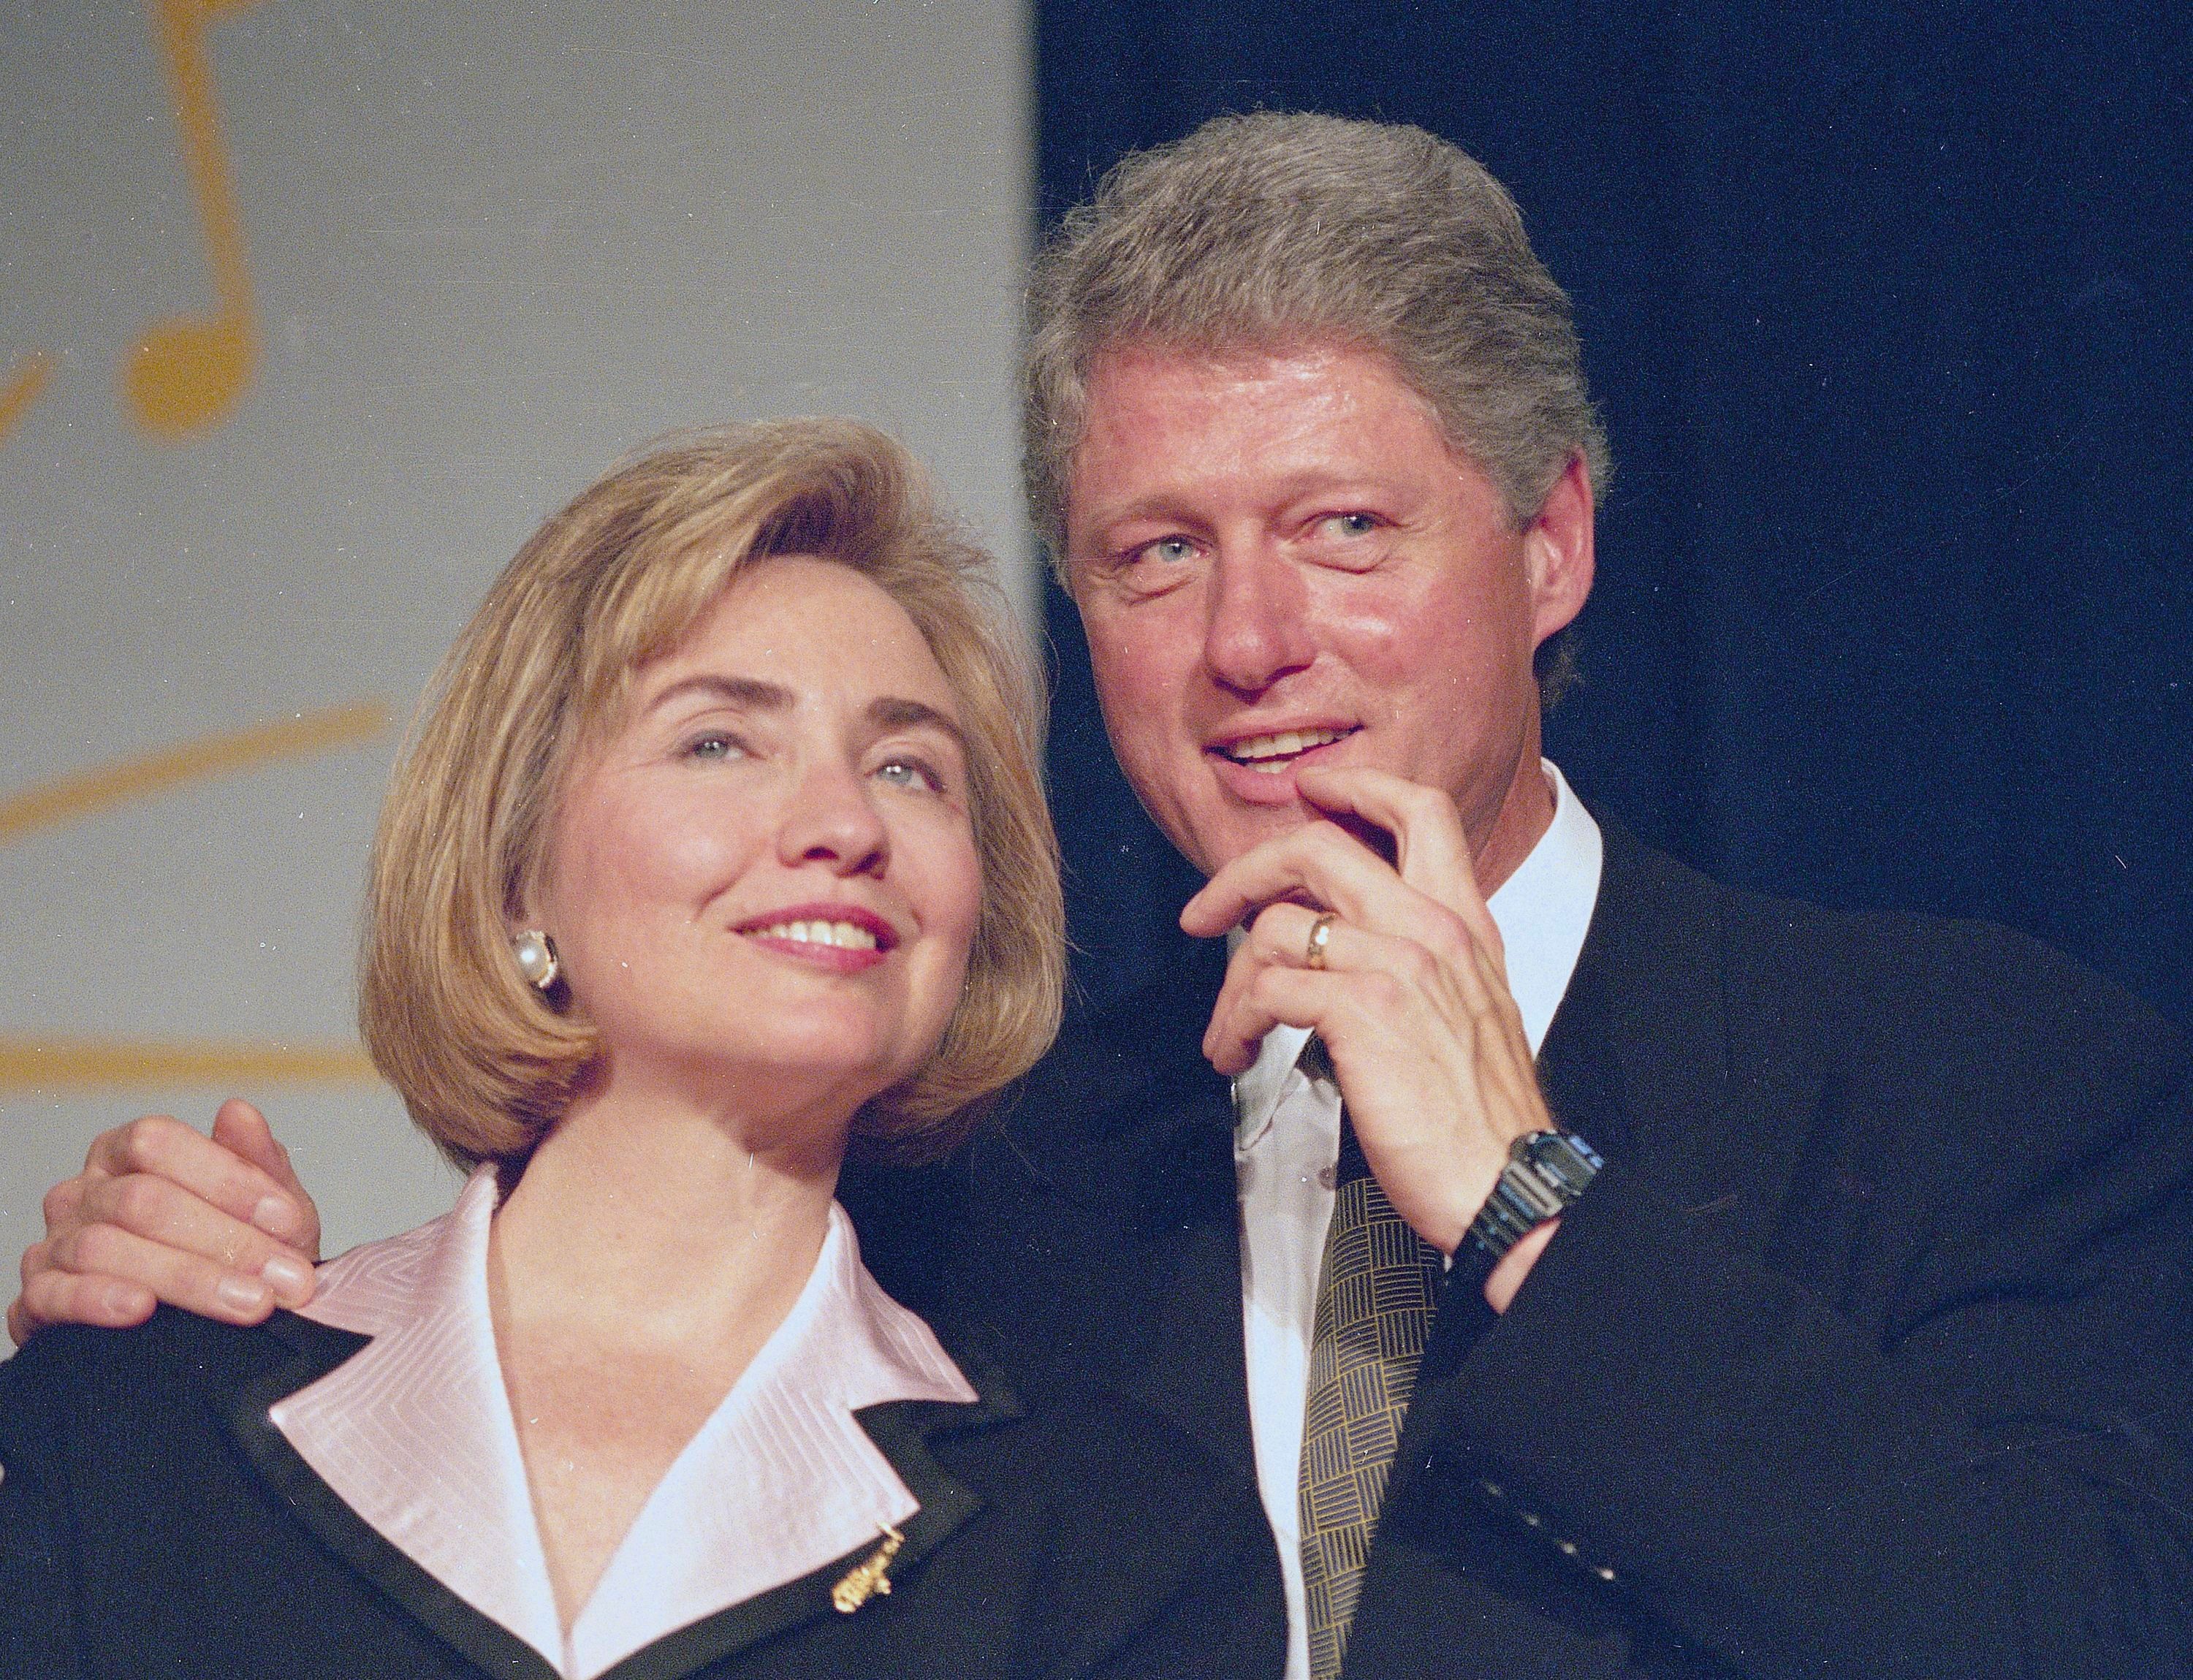 <p>"I did not have sexual relations with that woman." Or so President Bill Clinton claimed. It was eventually revealed that between November 1995 and March 1997, President Clinton and then-intern Monica Lewinsky had nine sexual encounters. Hillary Clinton famously stood by her man despite the sordid revelations.</p>